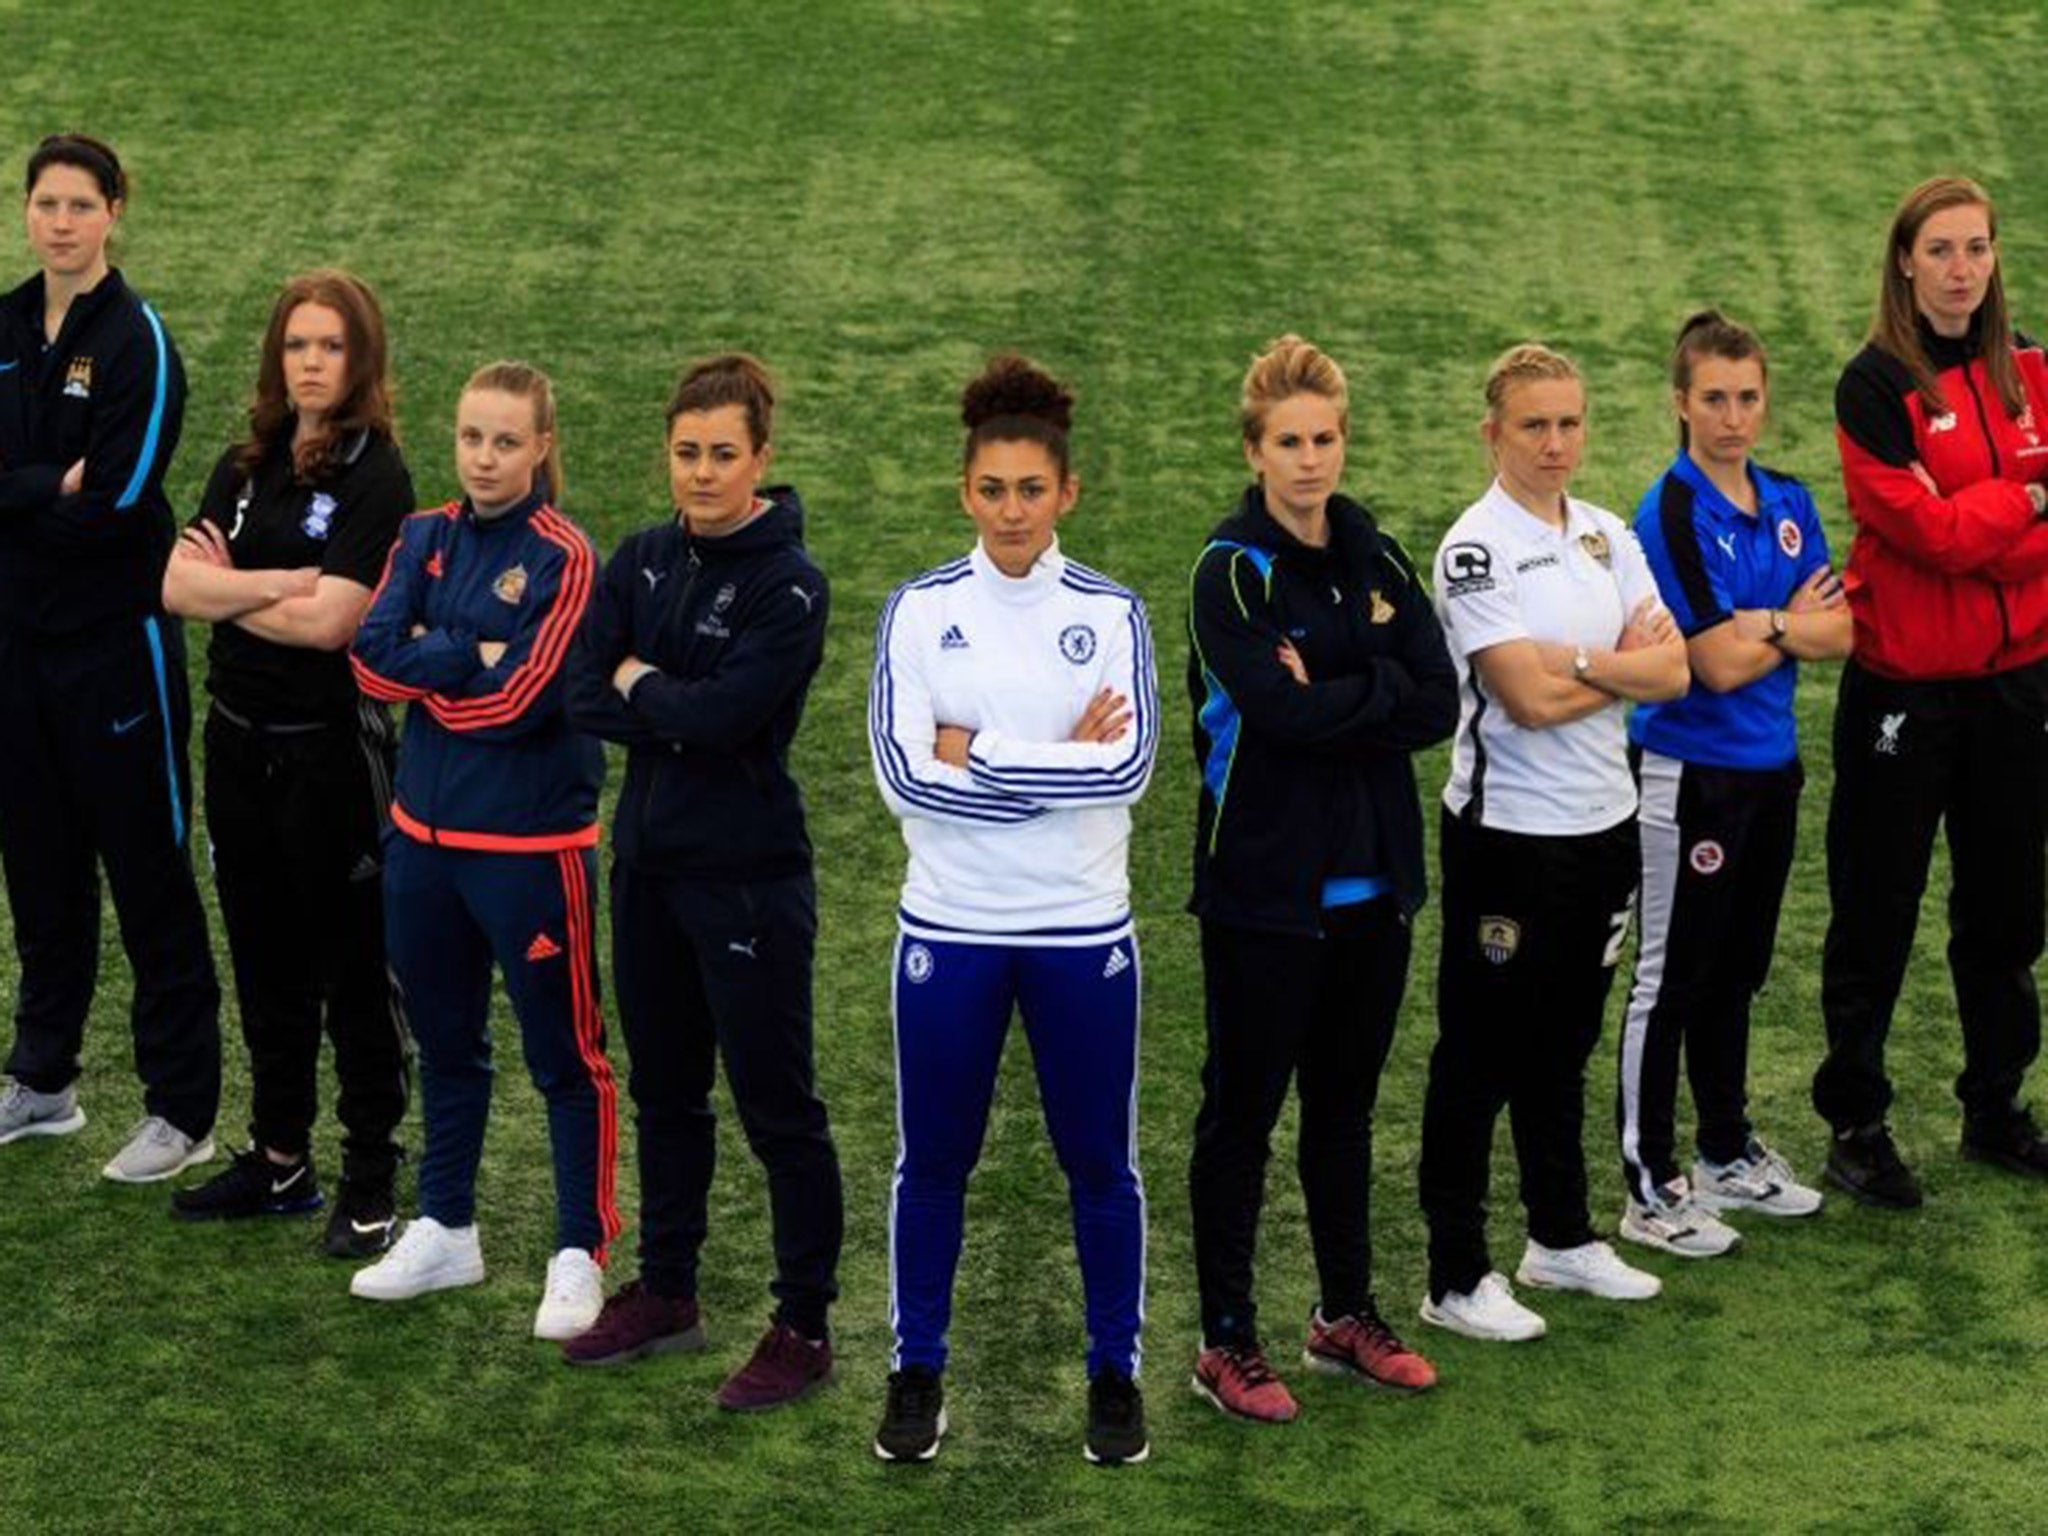 Manchester City's Maria Hourihan, Birmingham City's Aoife Mannion, Sunderland's Beth Mead, Arsenal's Jemma Rose, Chelsea's Jade Bailey, Doncaster Rovers Belles Natasha Dowie, Notts County's Laura Bassett, Reading's Amber Stobbs and Liverpool's Siobhan Chamberlain